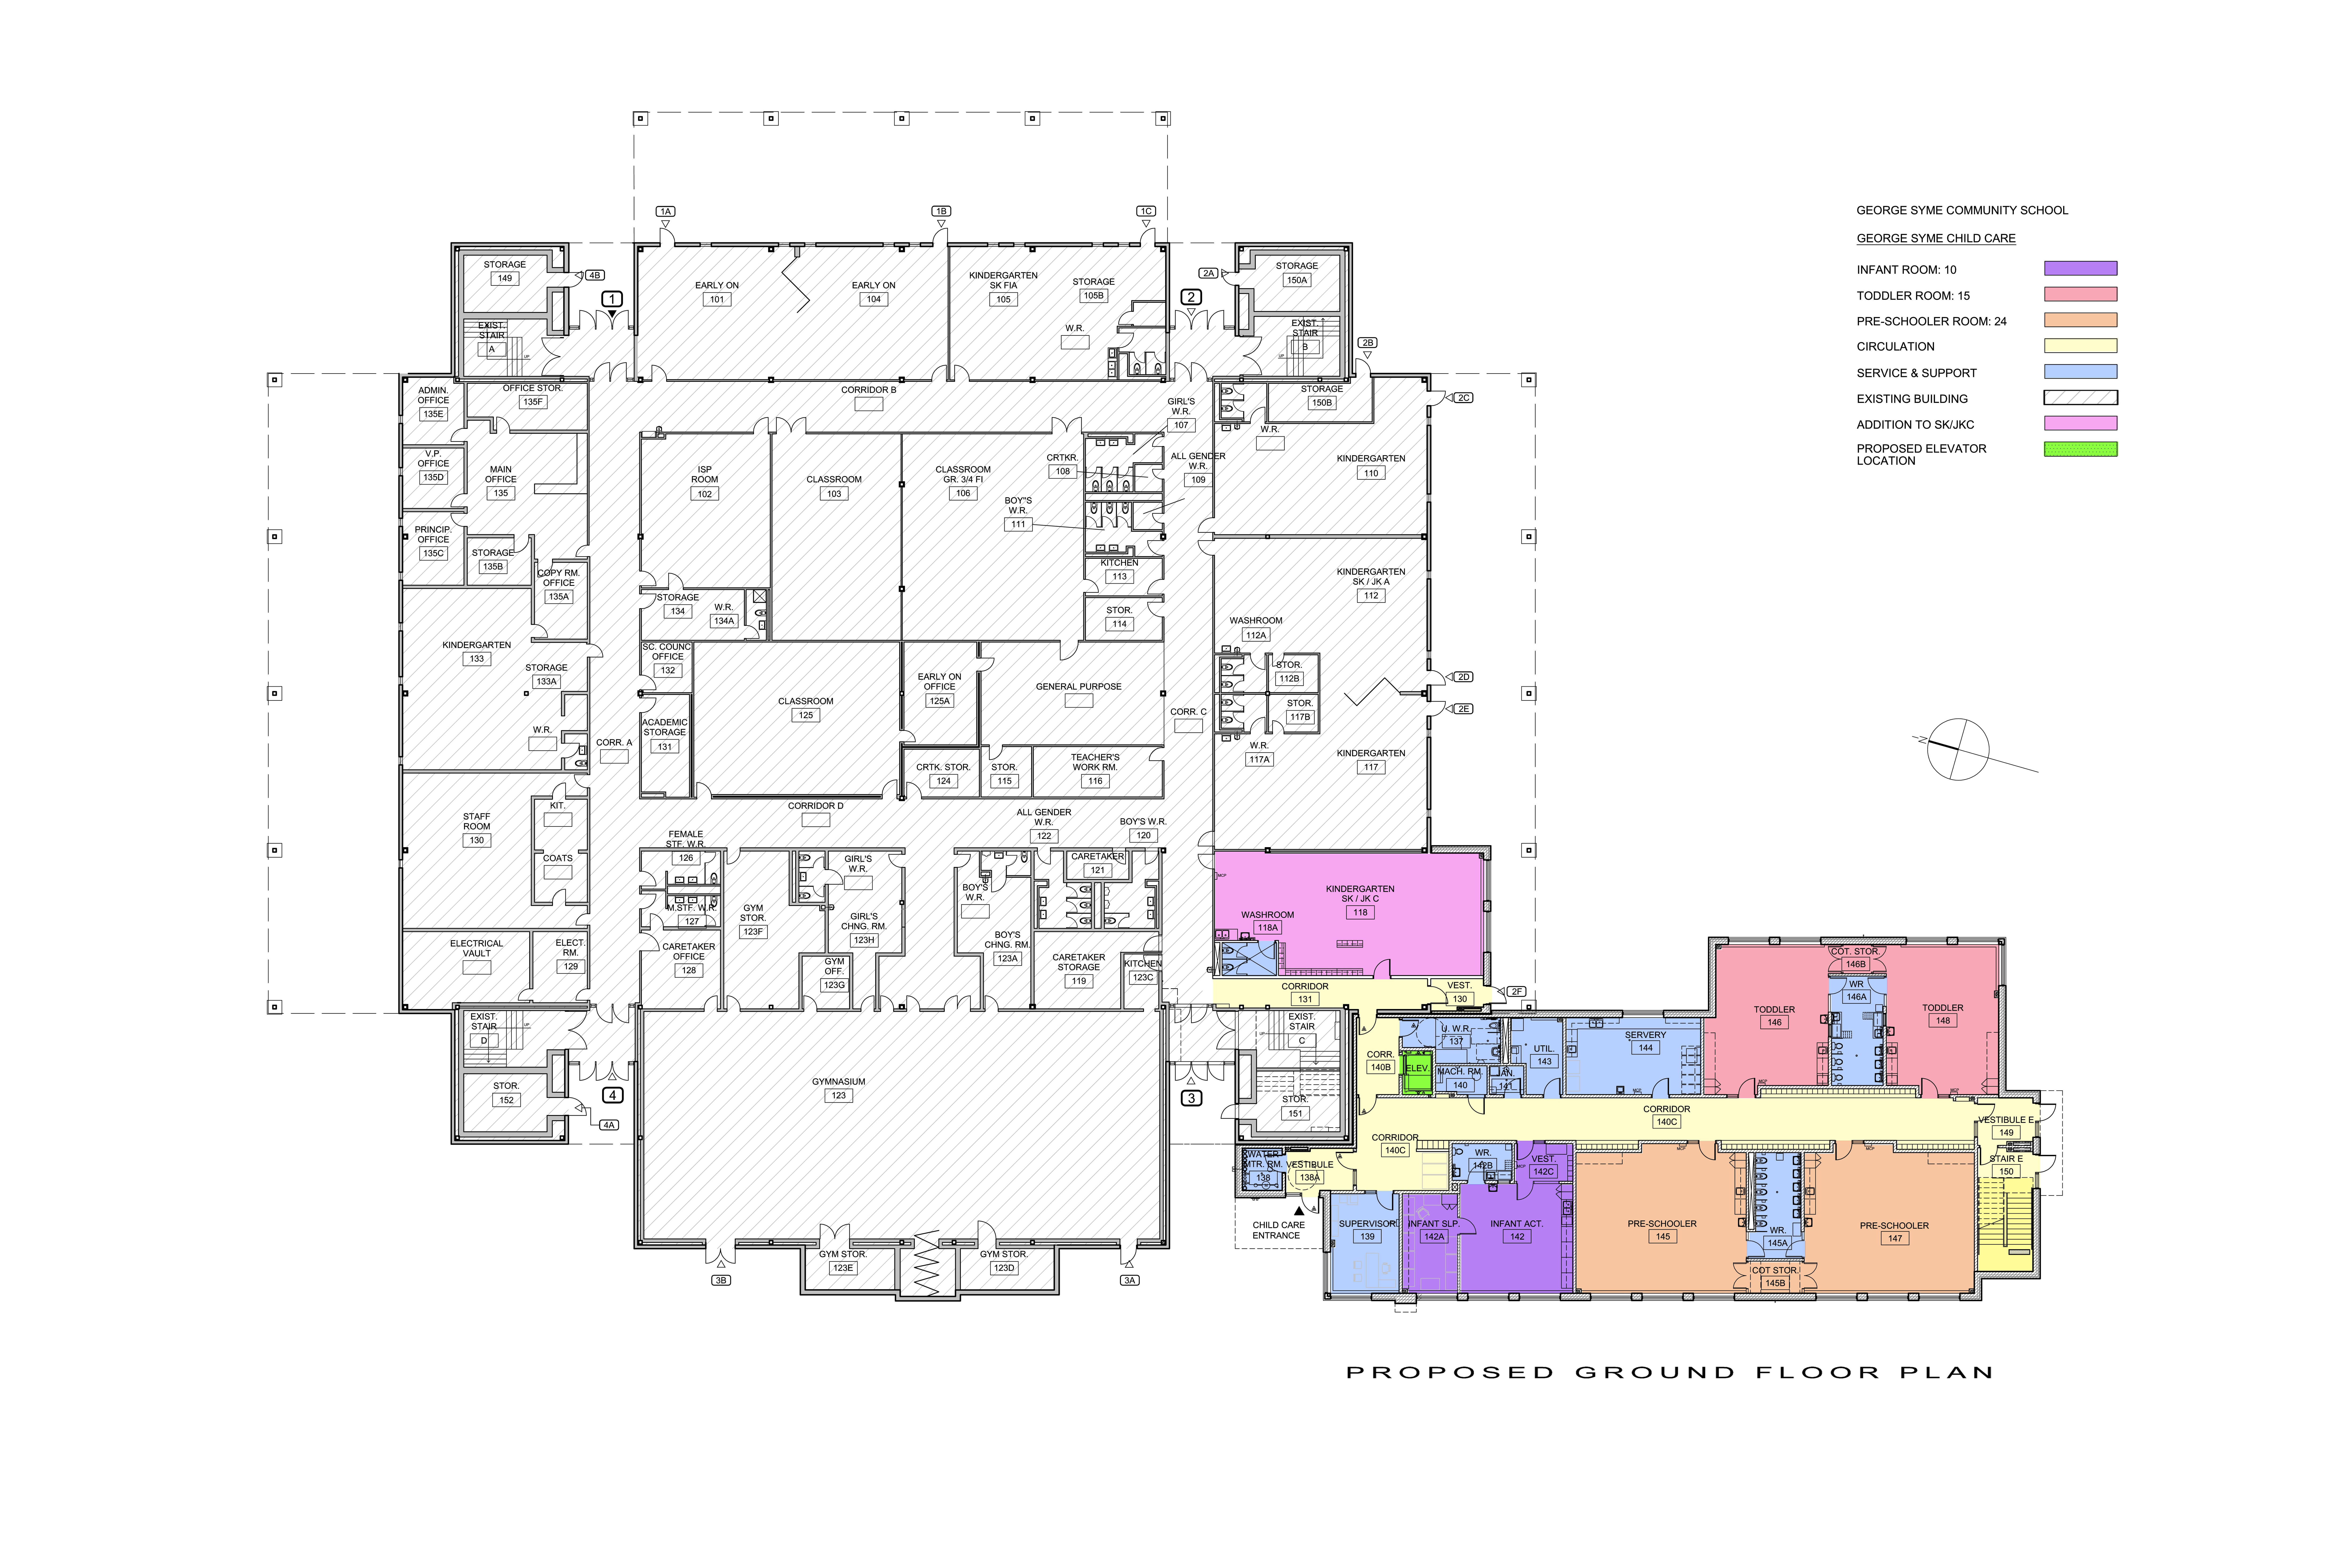 Architectural first floor plan looking down from above depicting instructional & operations spaces situated on the first floor after the project is completed. Open Gallery